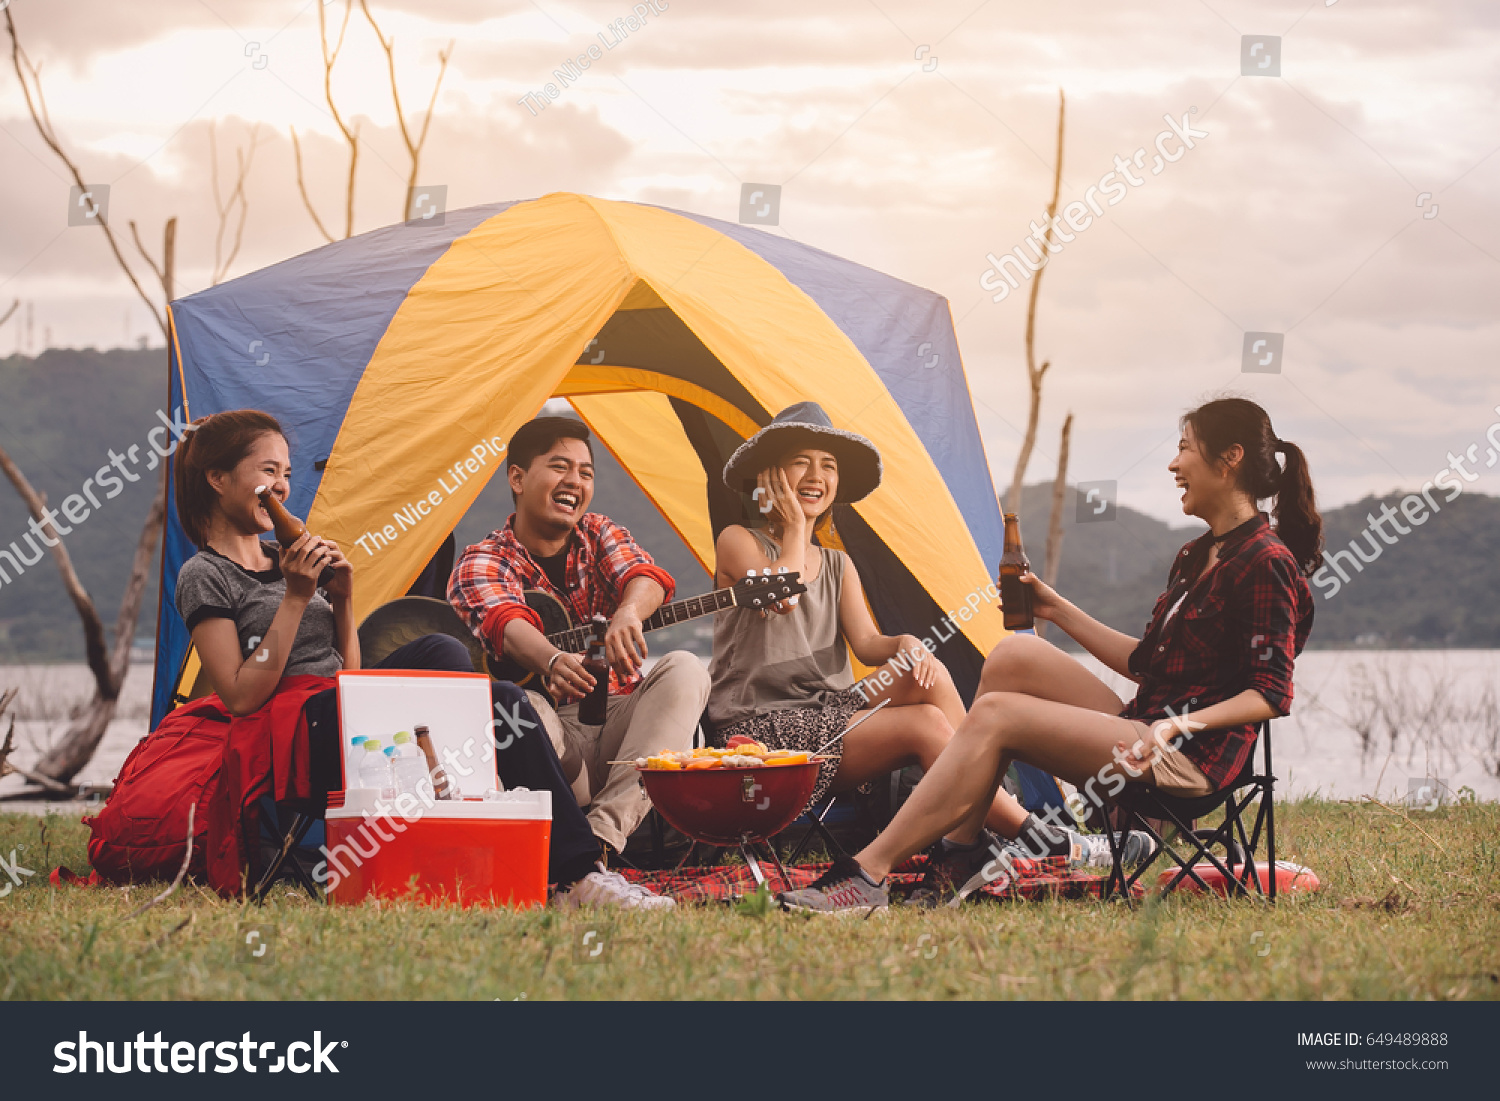 Group Friends Asian Camp Forest Adventure Stock Photo 649489888 ...